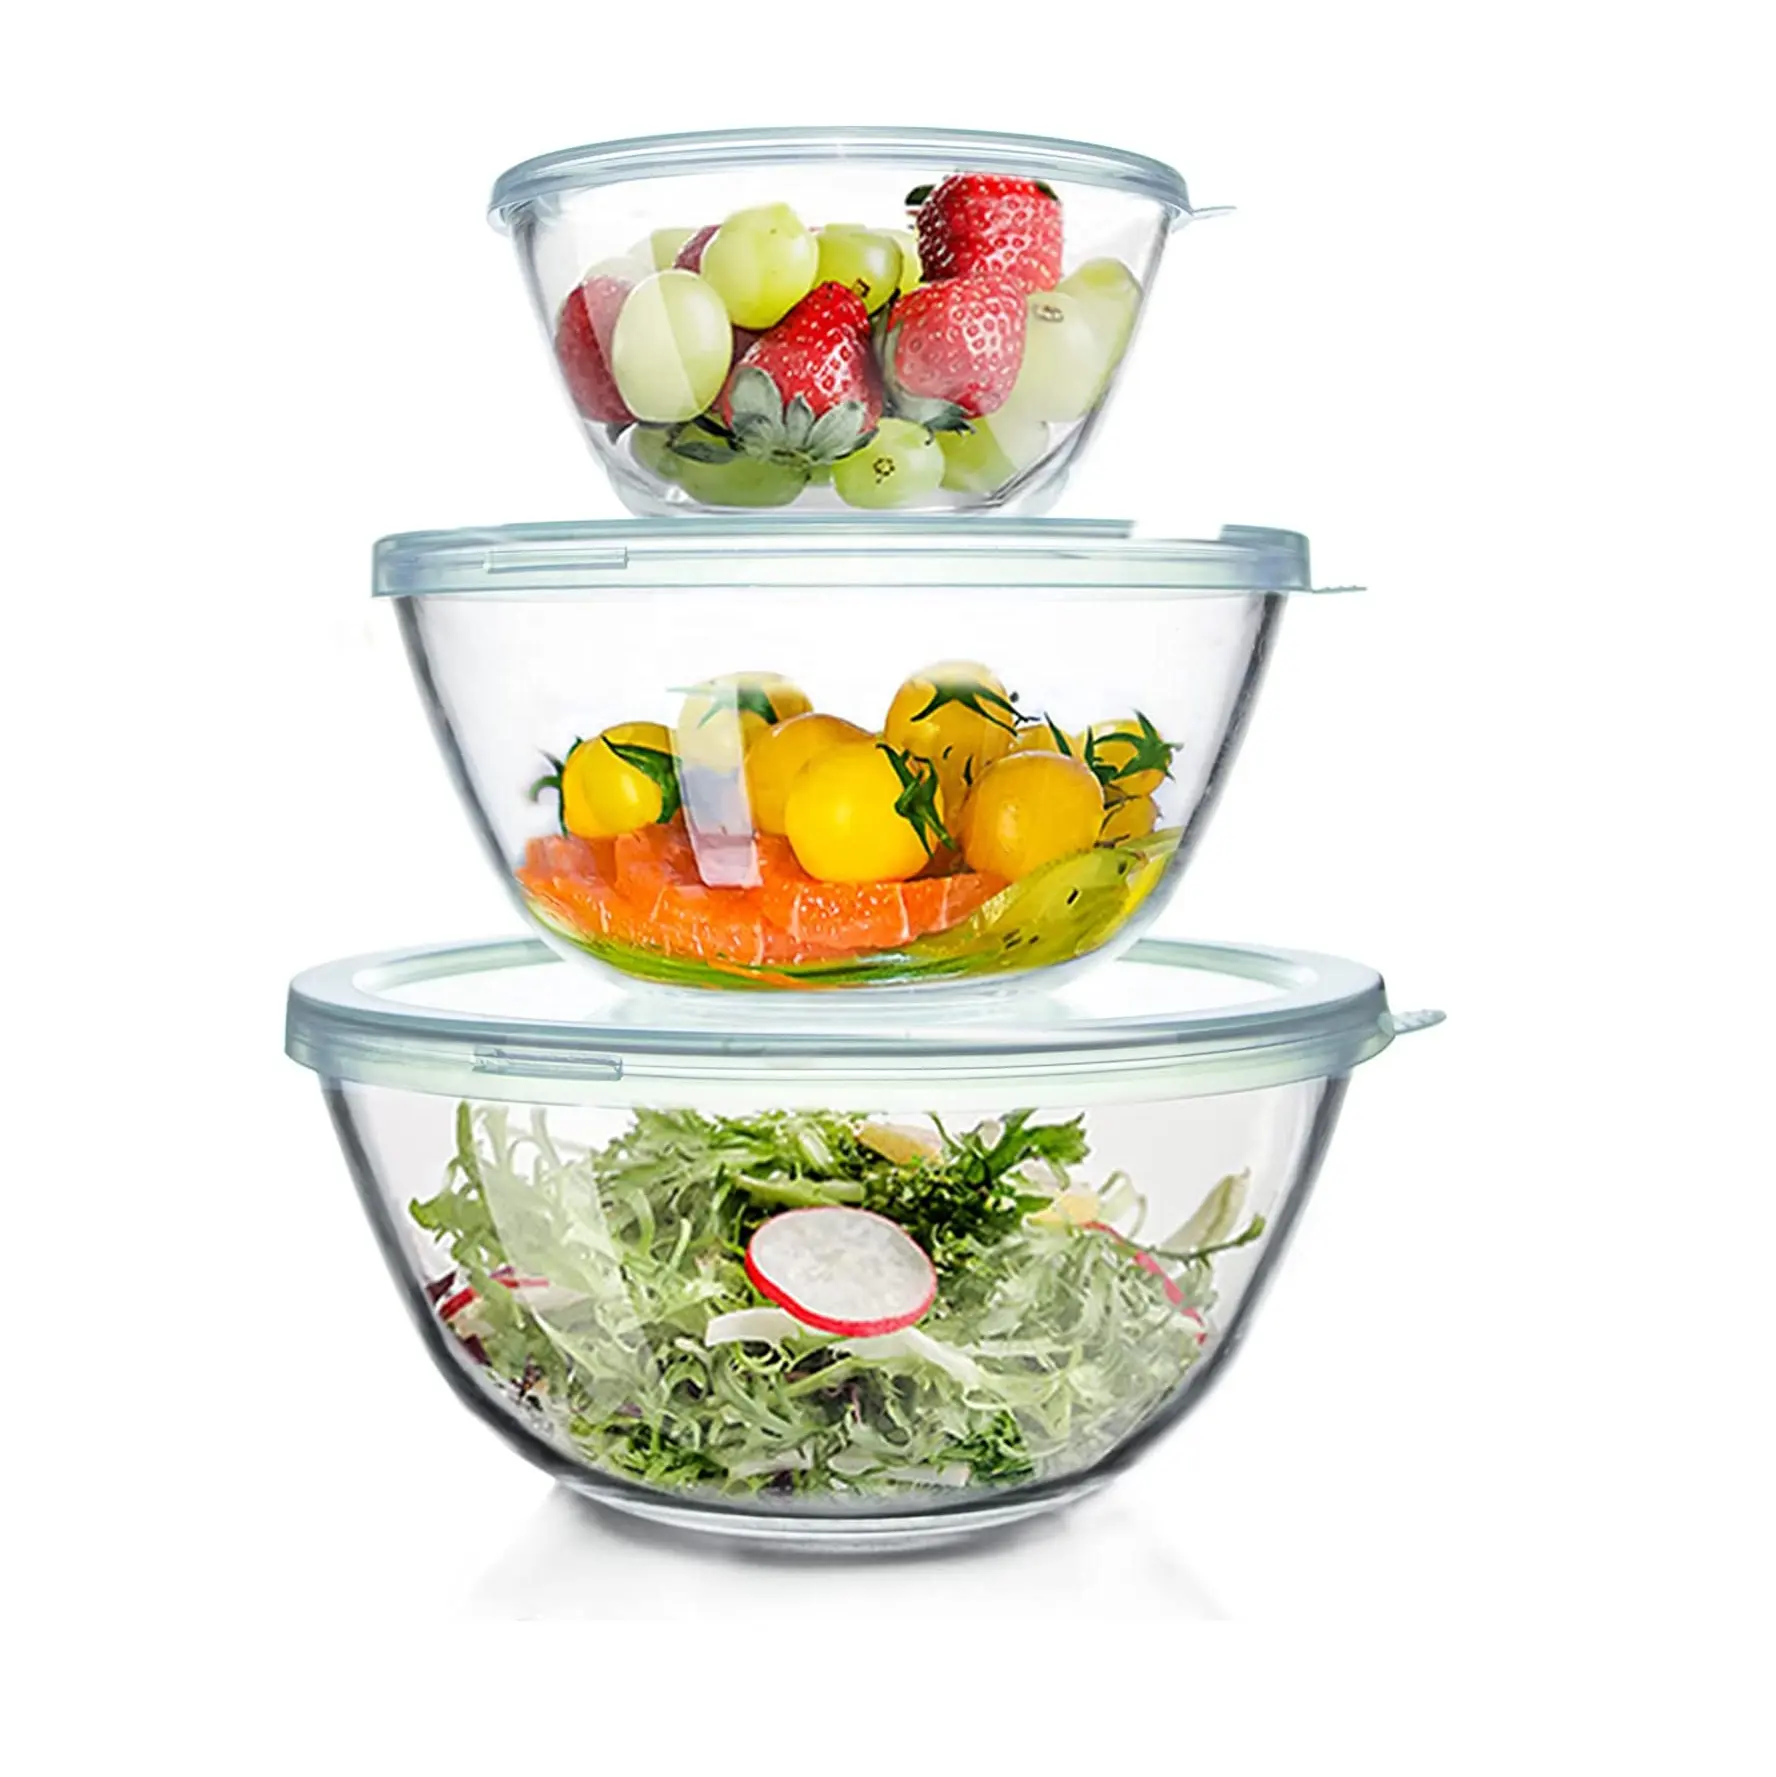 Glass Mixing Bowls with Lids Round Glass Serving Bowls for Cooking,Baking,Prepping,Dishwasher Safe